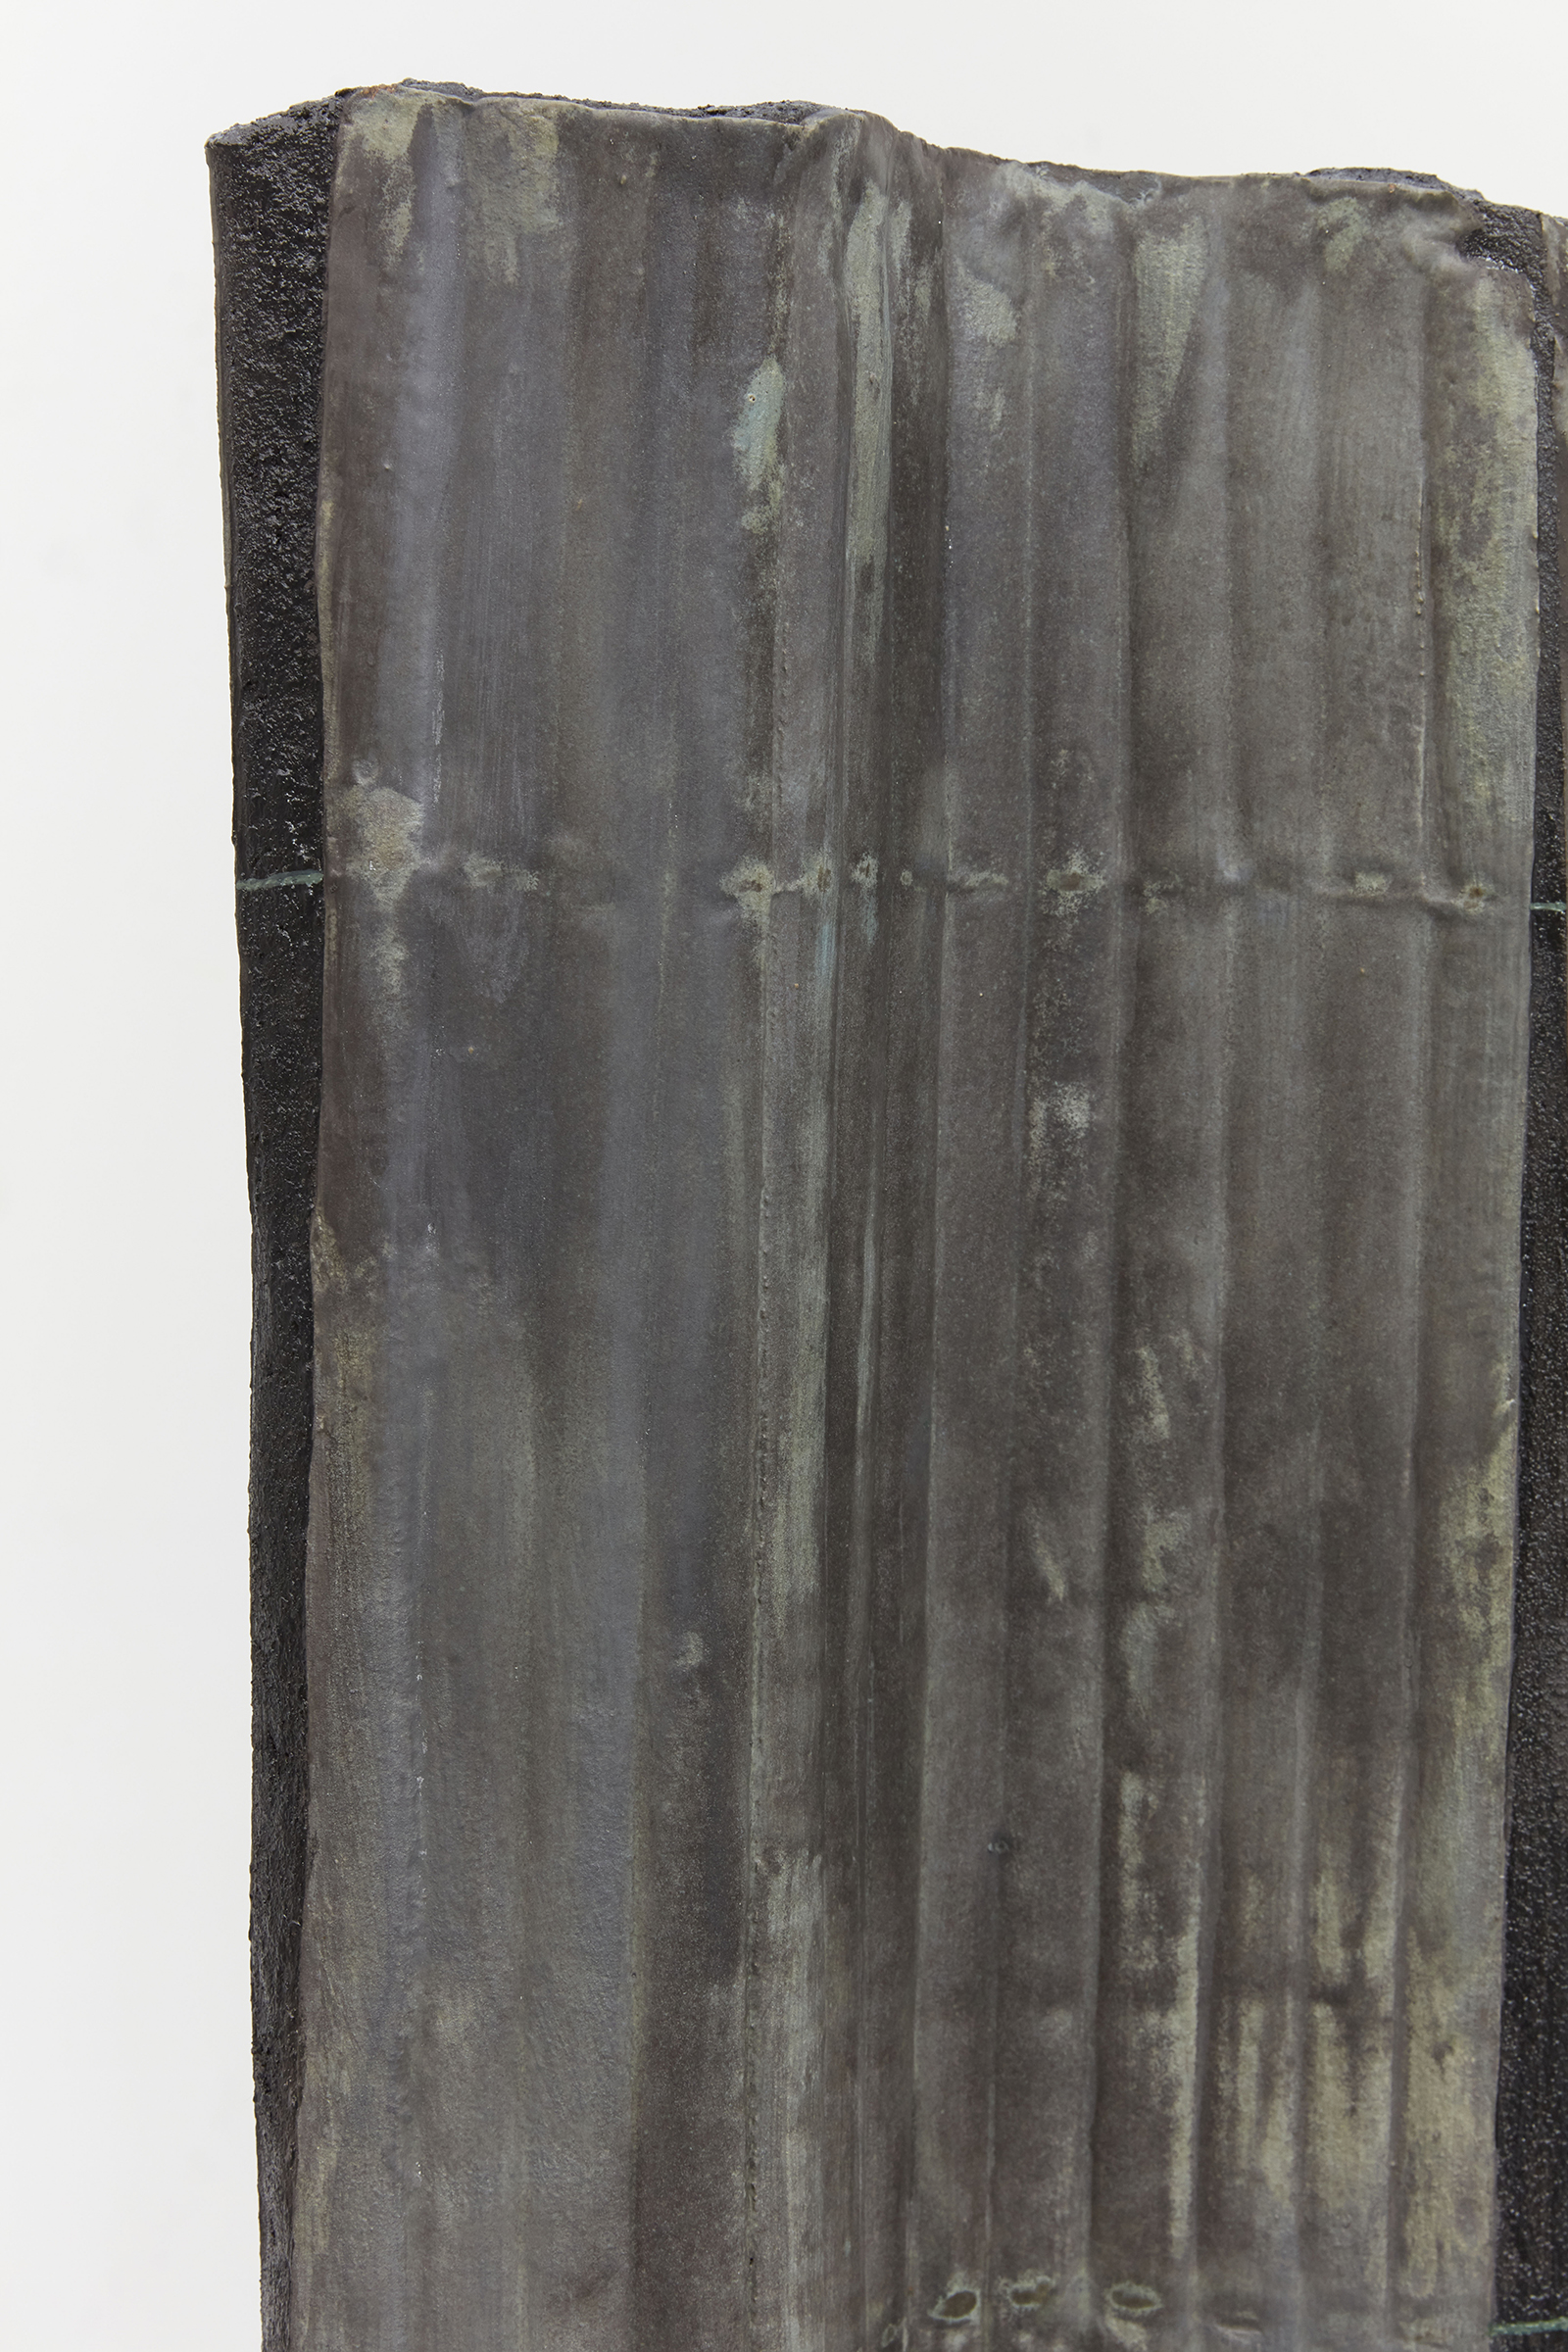 Anne Libby, Total Partial Annular (detail), 2020, glazed ceramic, steel, sanded grout, 66h x 12w x 12d in.